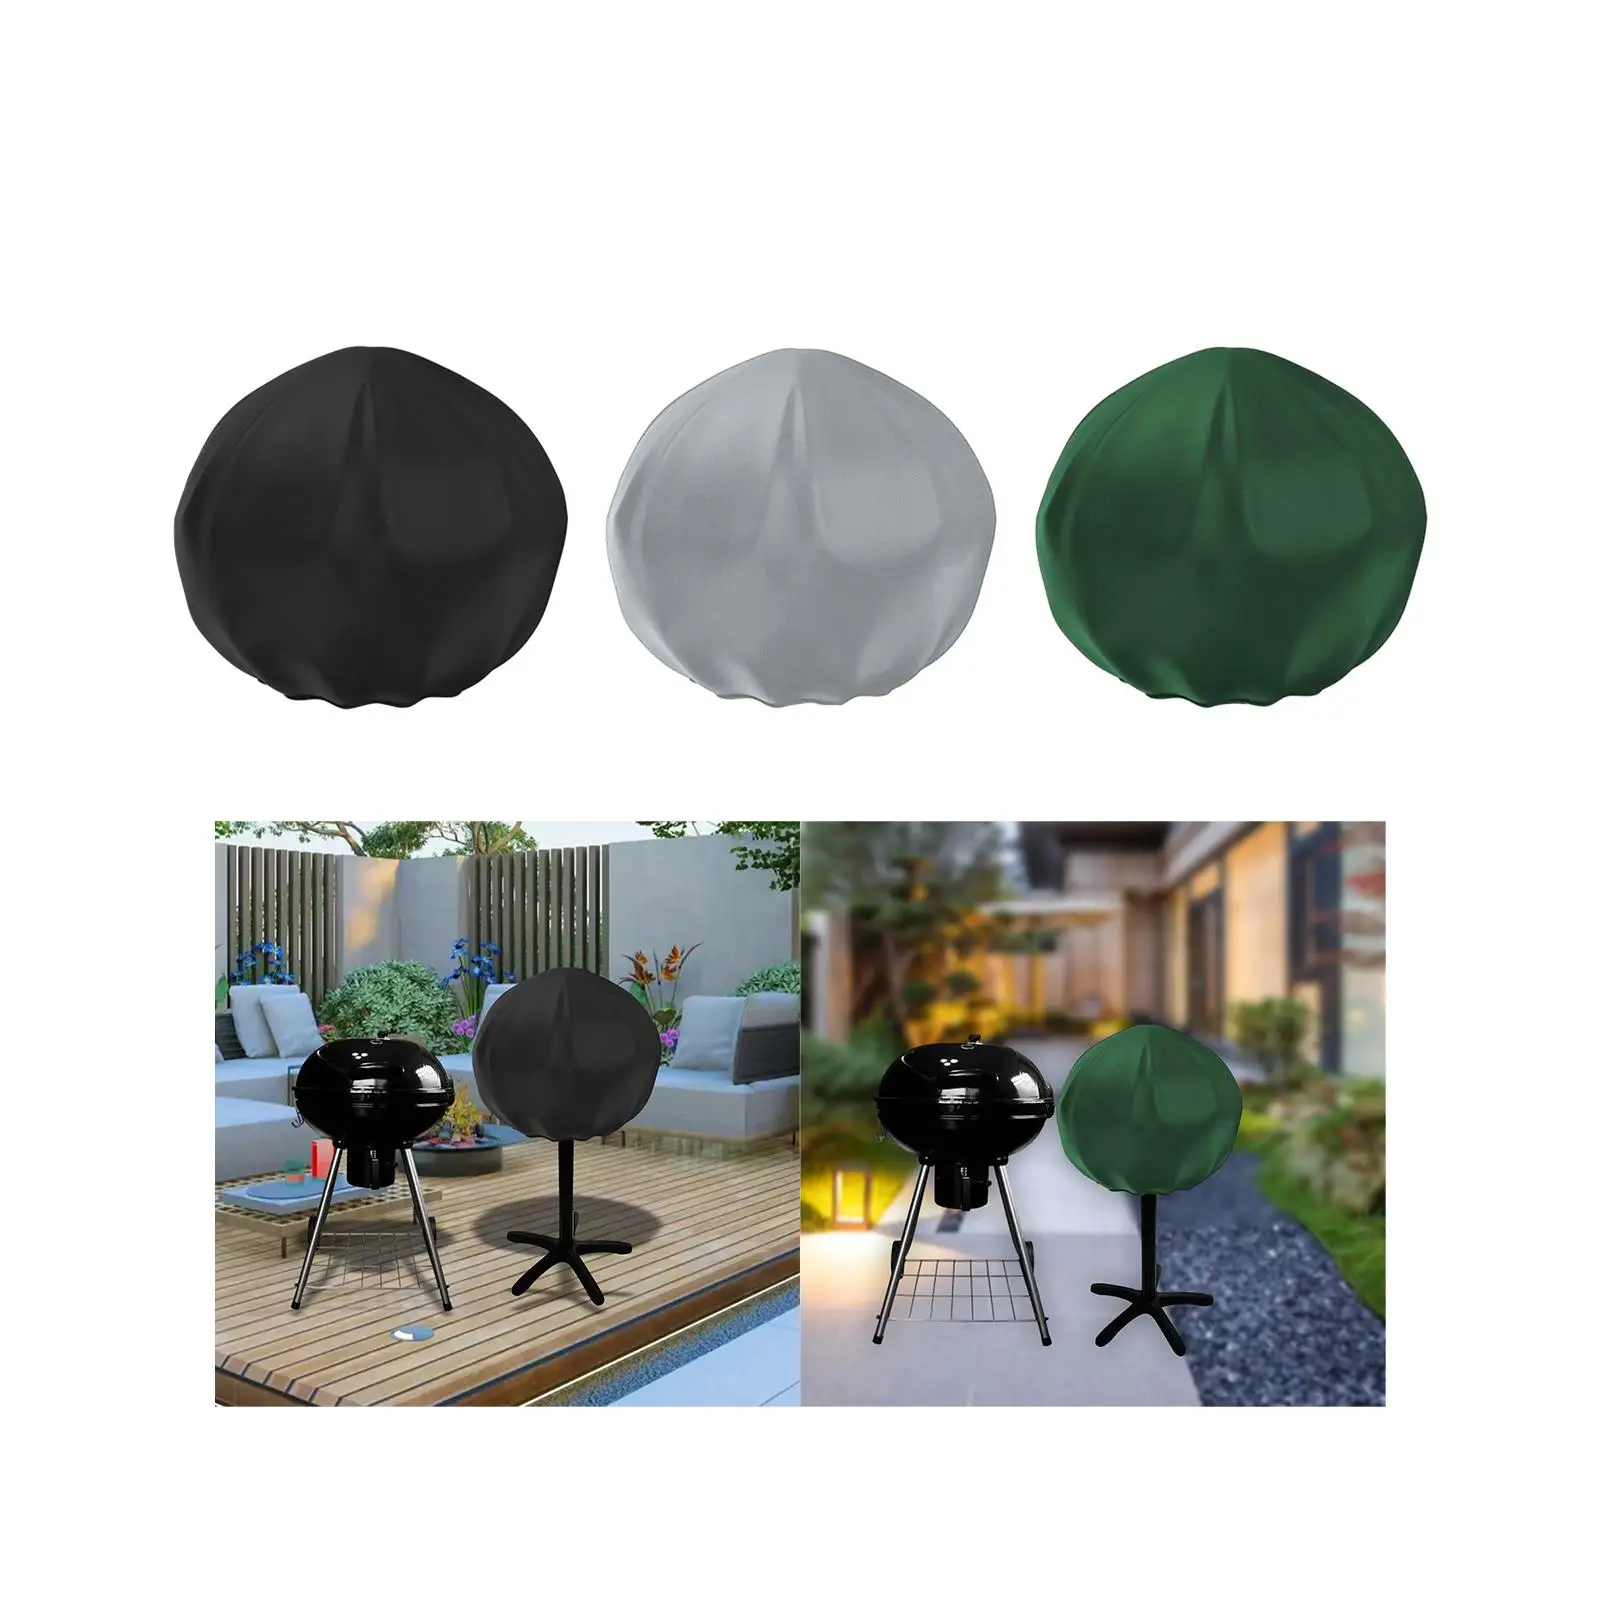 Round Grills Cover Charcoal Grill Cover Weather Resistant 17inch 18inch Portable Waterproof Protector for Outdoor Garden Patio